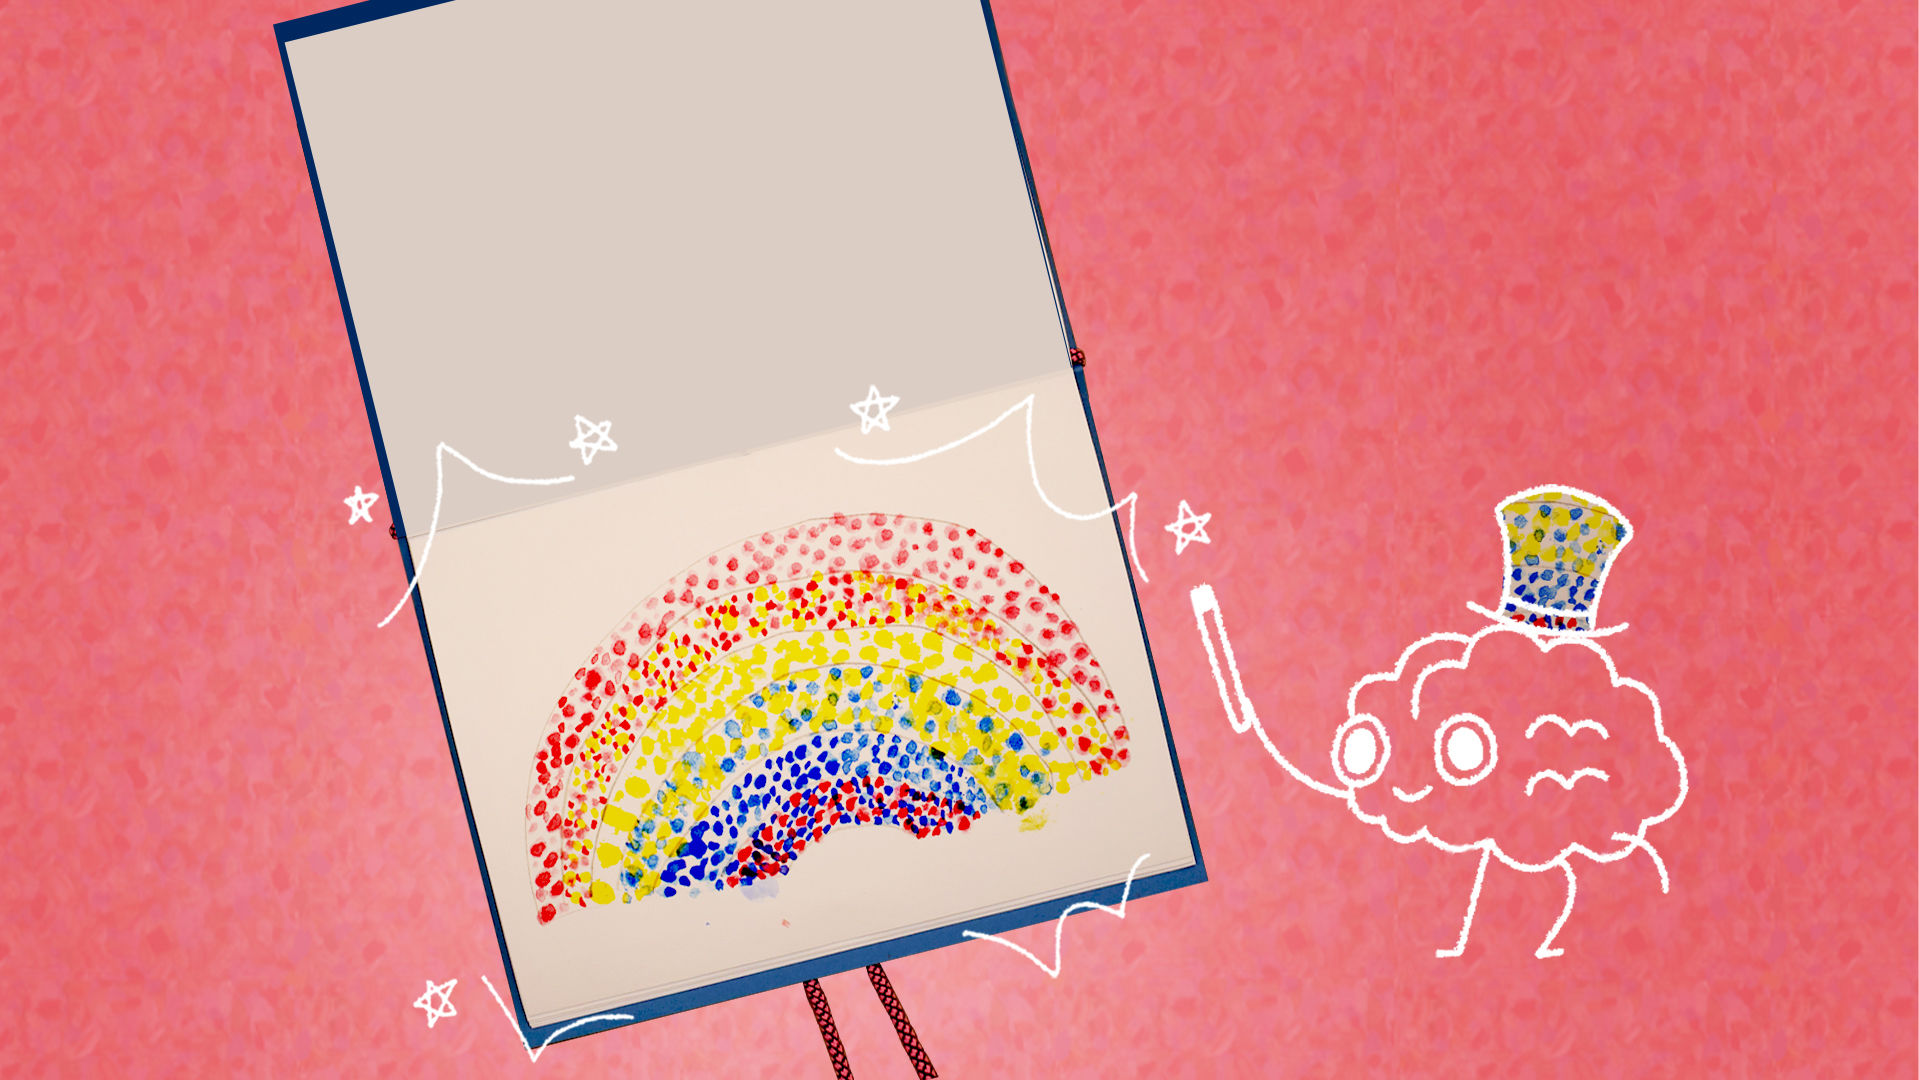 An illustrated brain character waves a magic wand over an open sketchbook page featuring an illustrated rainbow painted with many colorful dots.